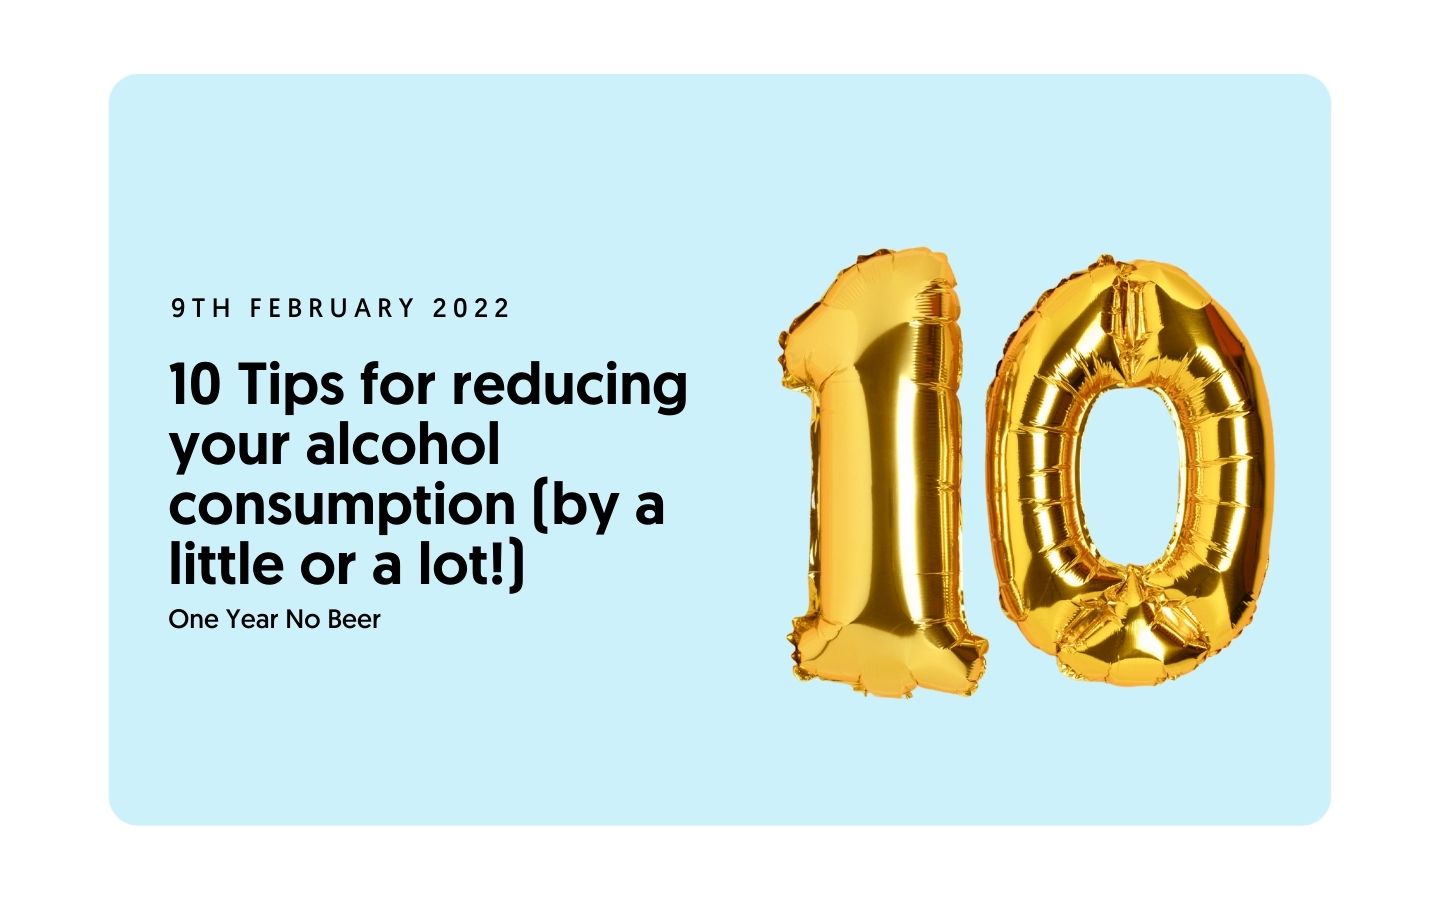 10 Tips for reducing your alcohol consumption (by a little or a lot!)